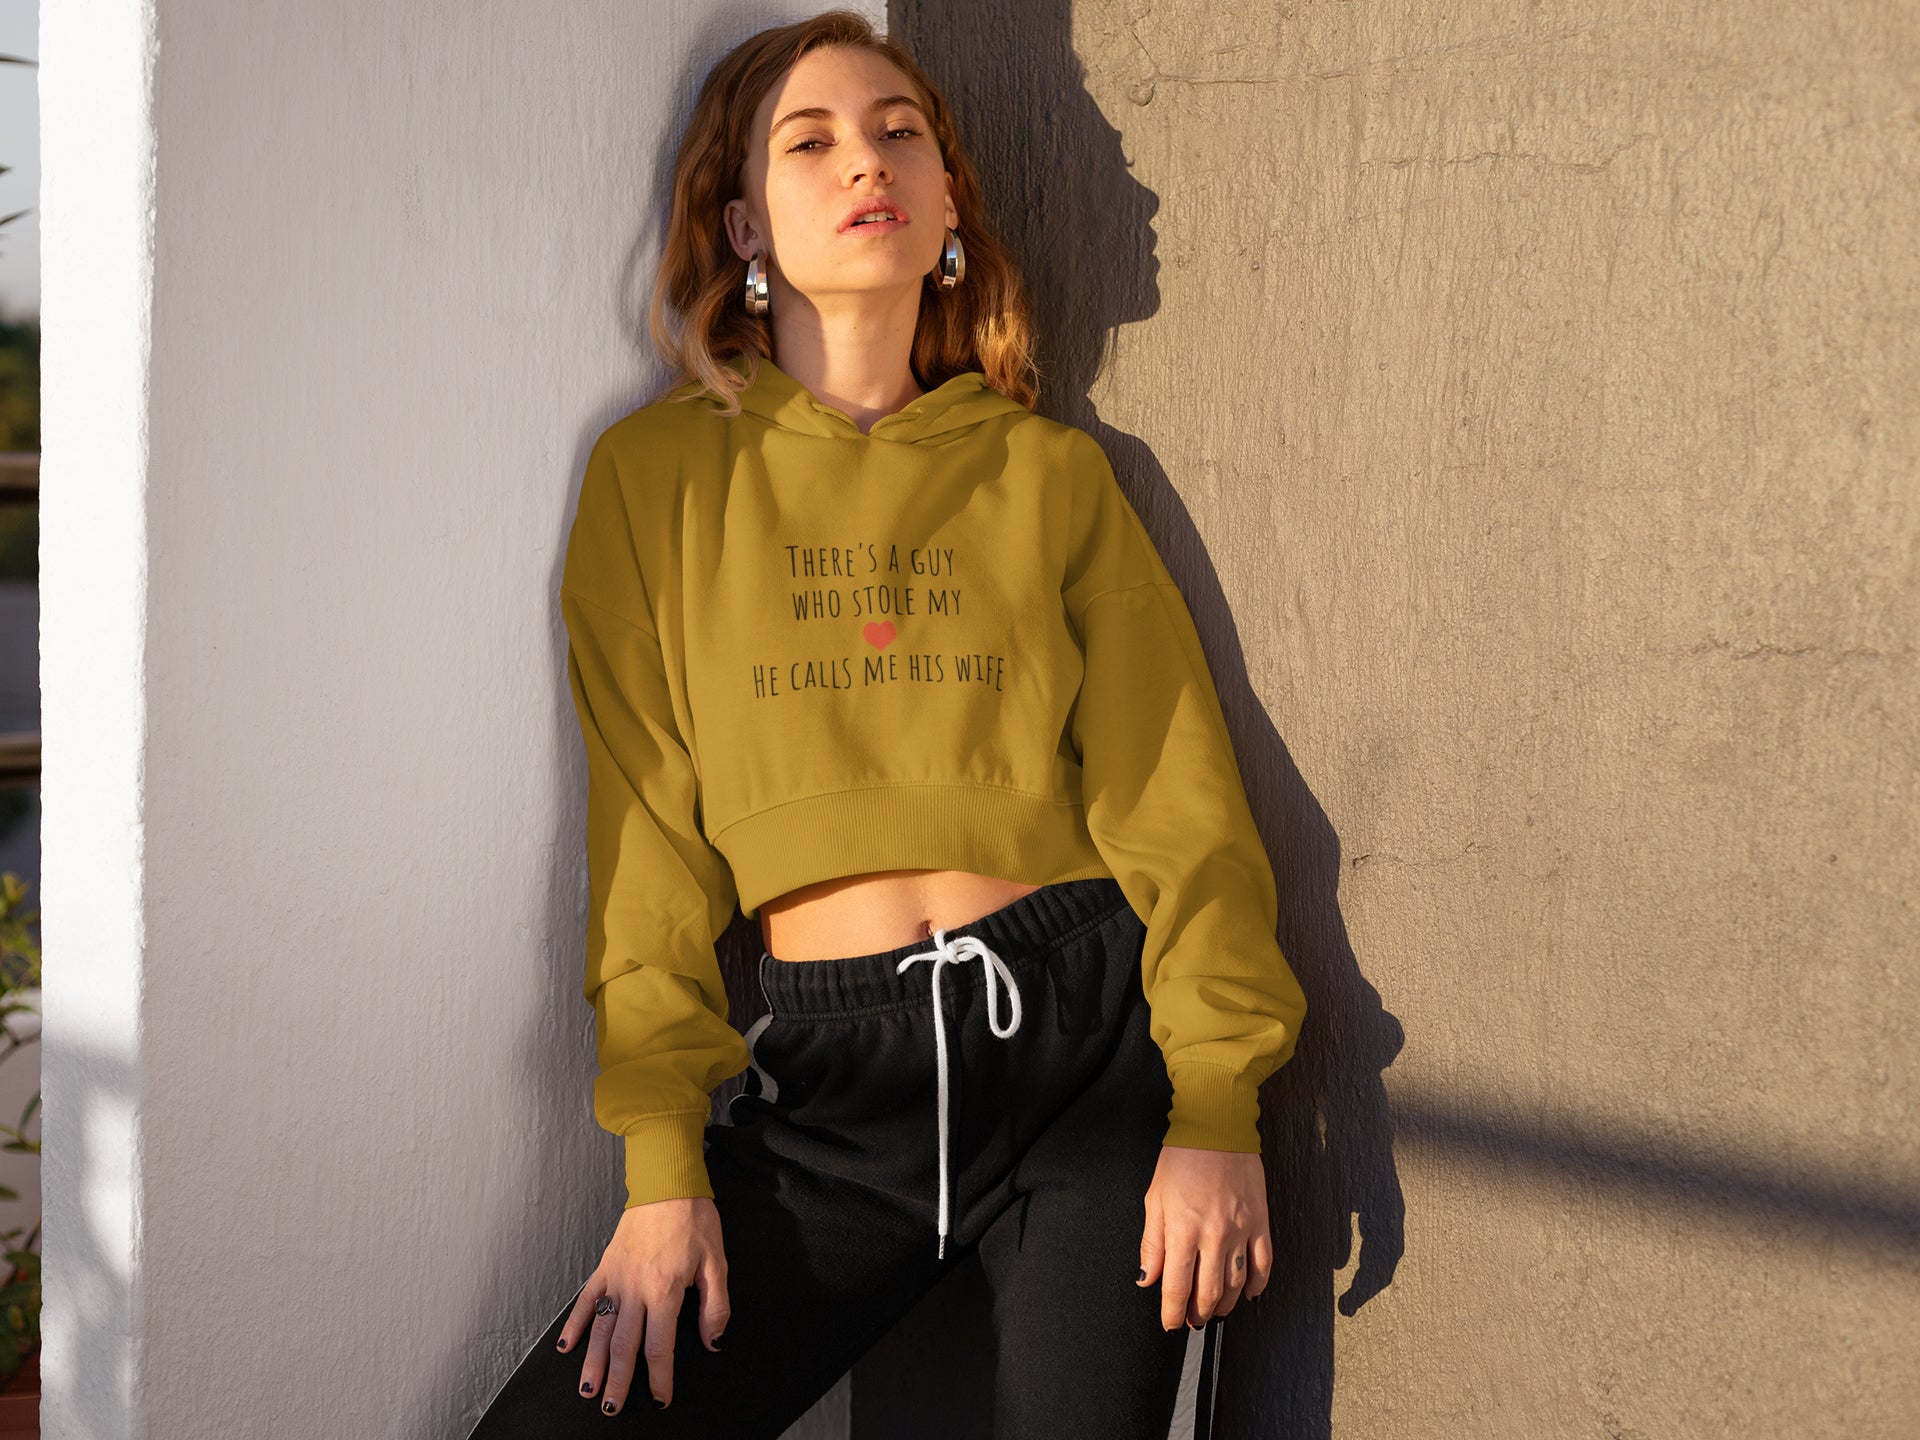 CROP HOODIE FOR WOMEN ( IT'S TIME TO WINTER)